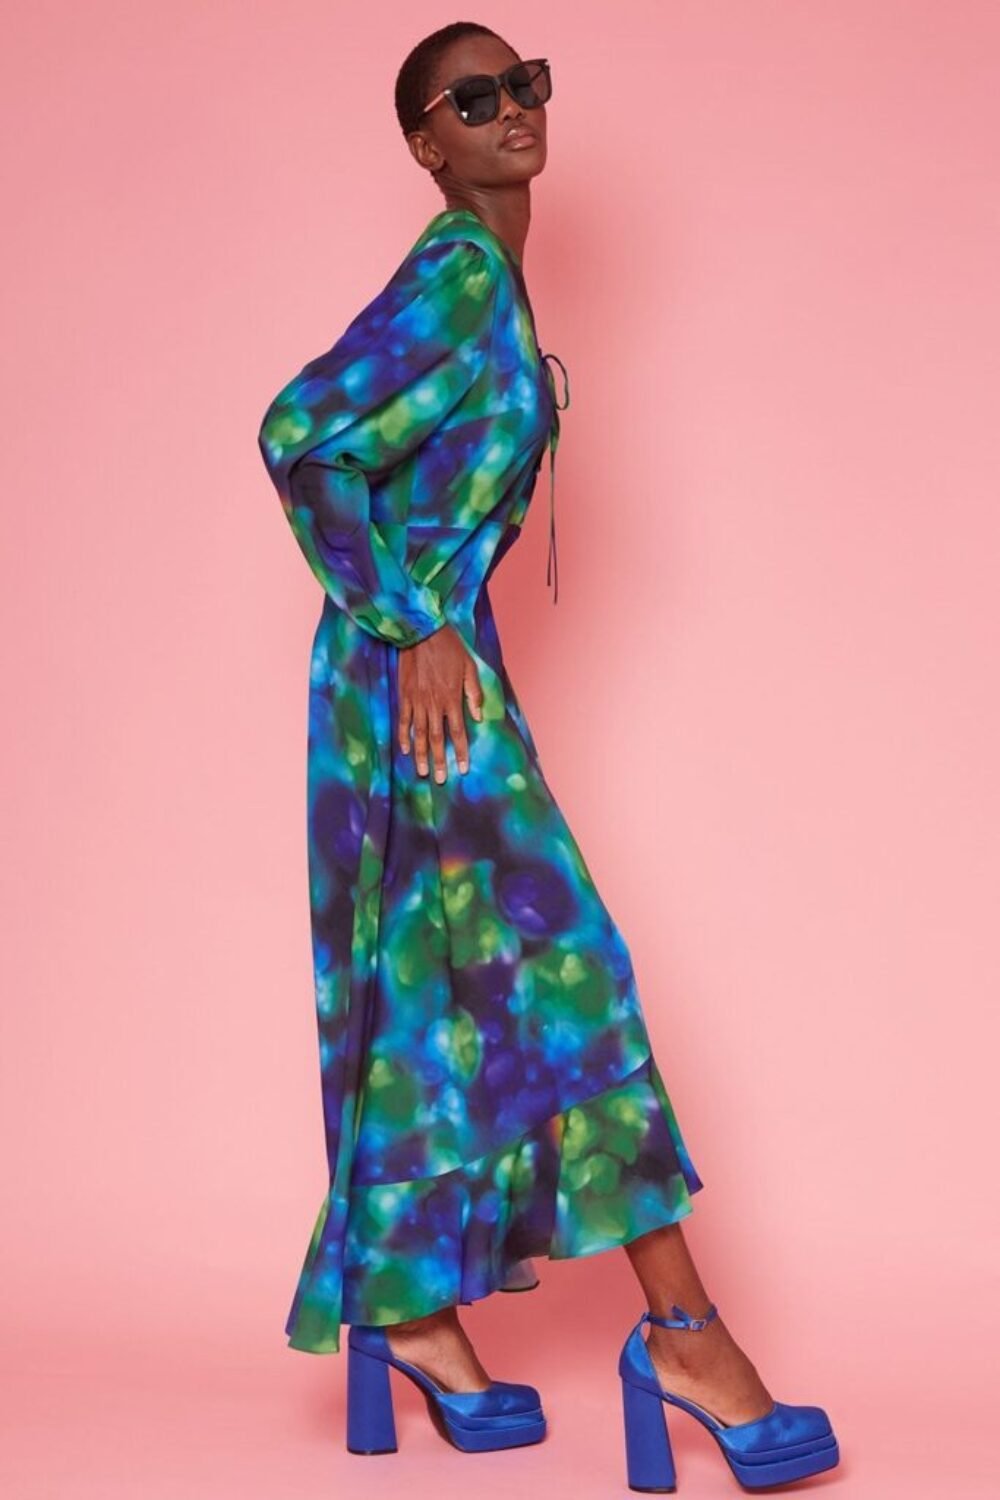 Shop Lux Cleo Silk Blend Maxi Dress and women's luxury and designer clothes at www.lux-apparel.co.uk